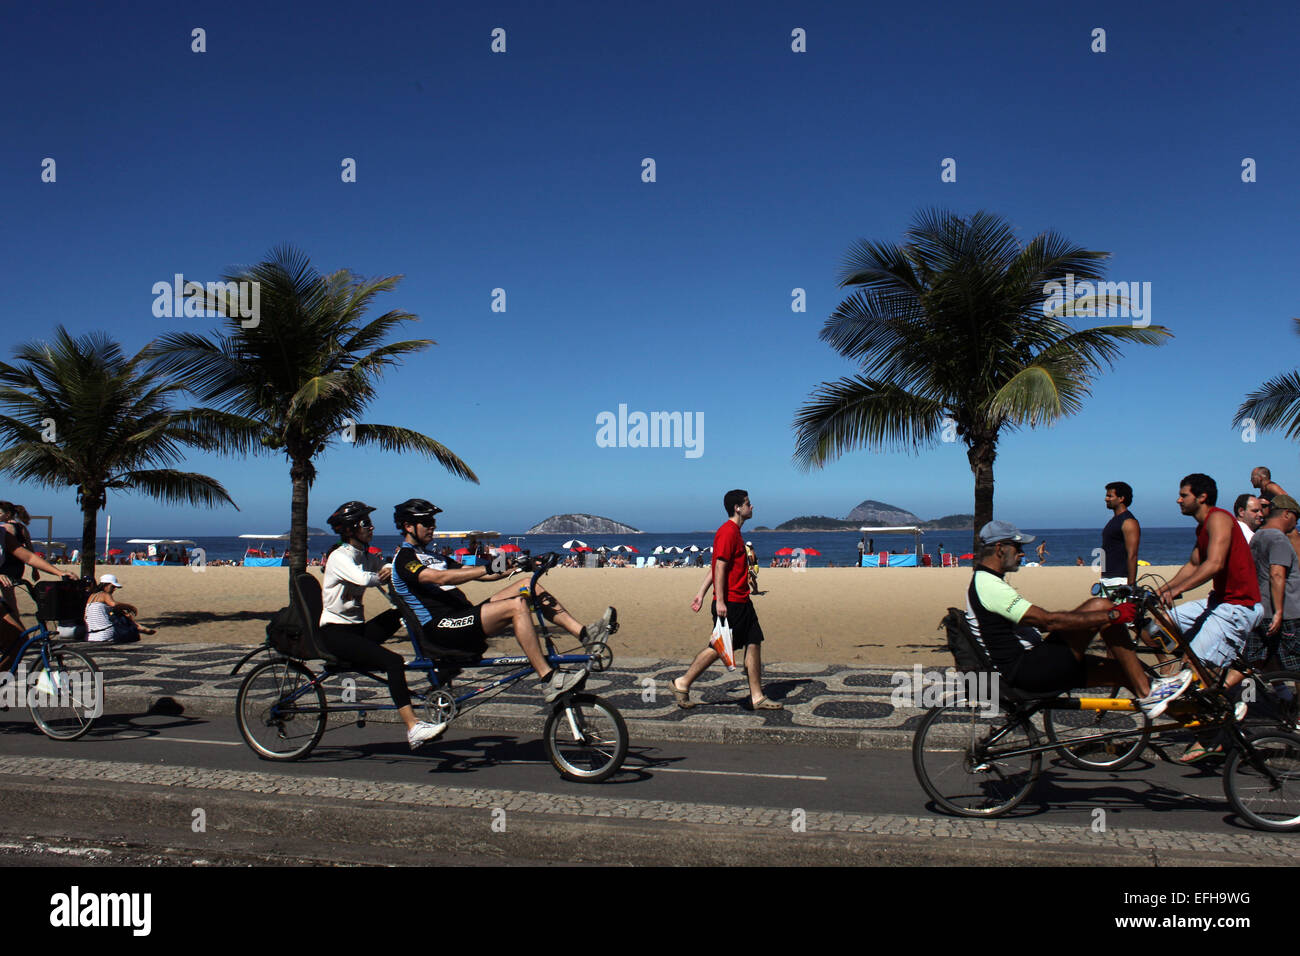 RIO DE JANEIRO, JULY 6:  Fitness enthusiasts works out at fitness workstation on the edge of Copacobana Beach, Rio de Janeiro, Brazil. July 6, 2010.Photo by Lisa Wiltse Stock Photo